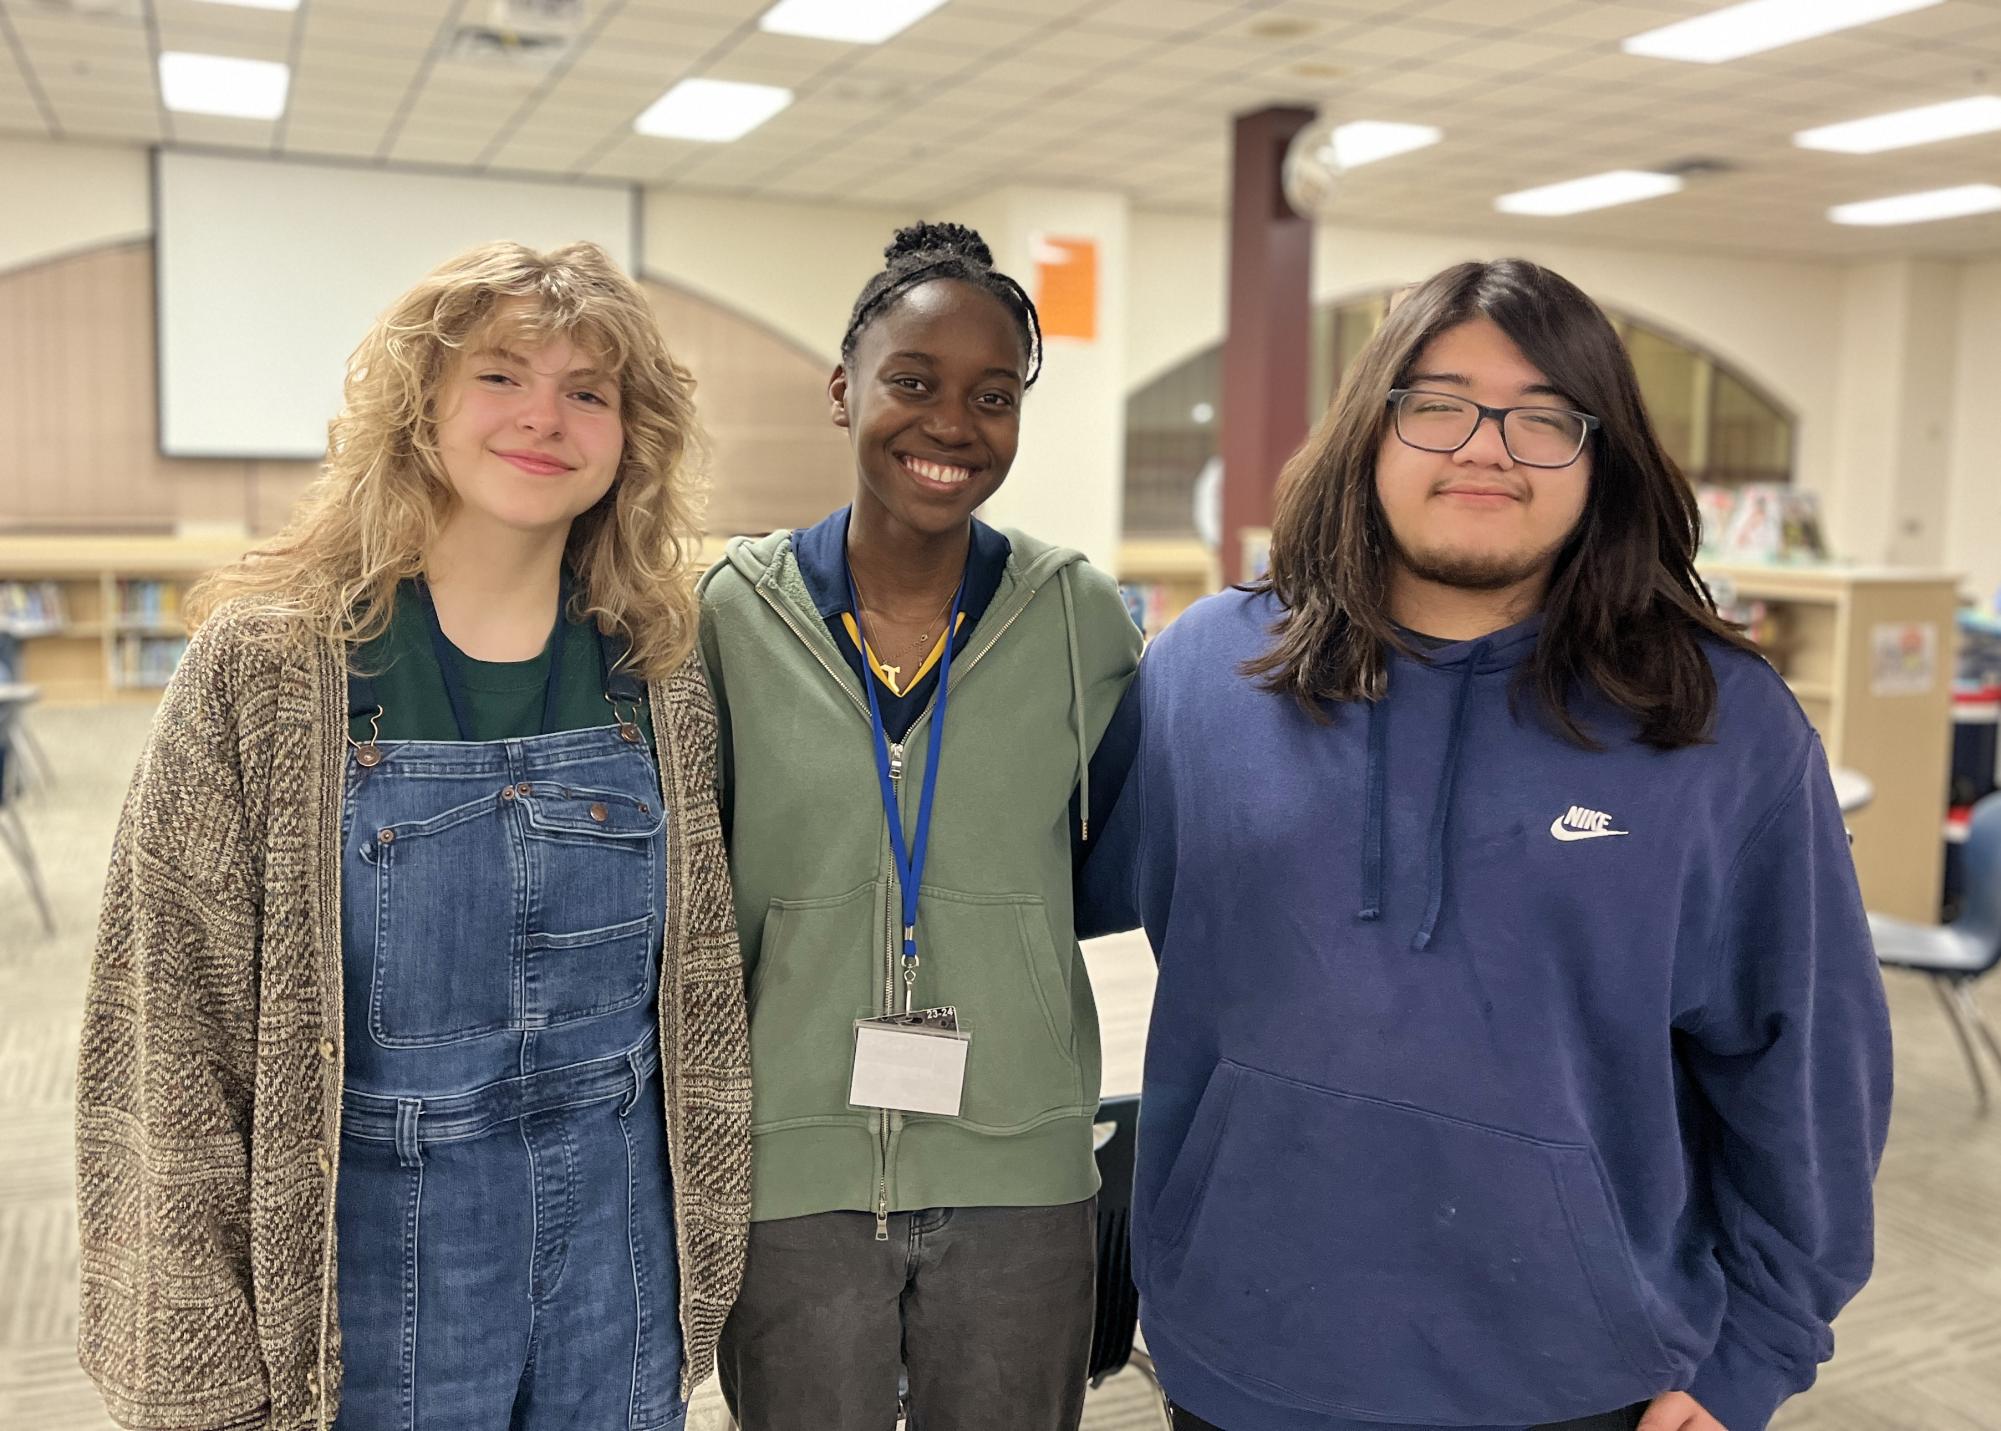 Copy editor Maggie Volpi, Editor-in-Chief Gloria Olajimi and staffer Gabe Ferrel represented East at District UIL April 4 and placed in every journalism event offered.